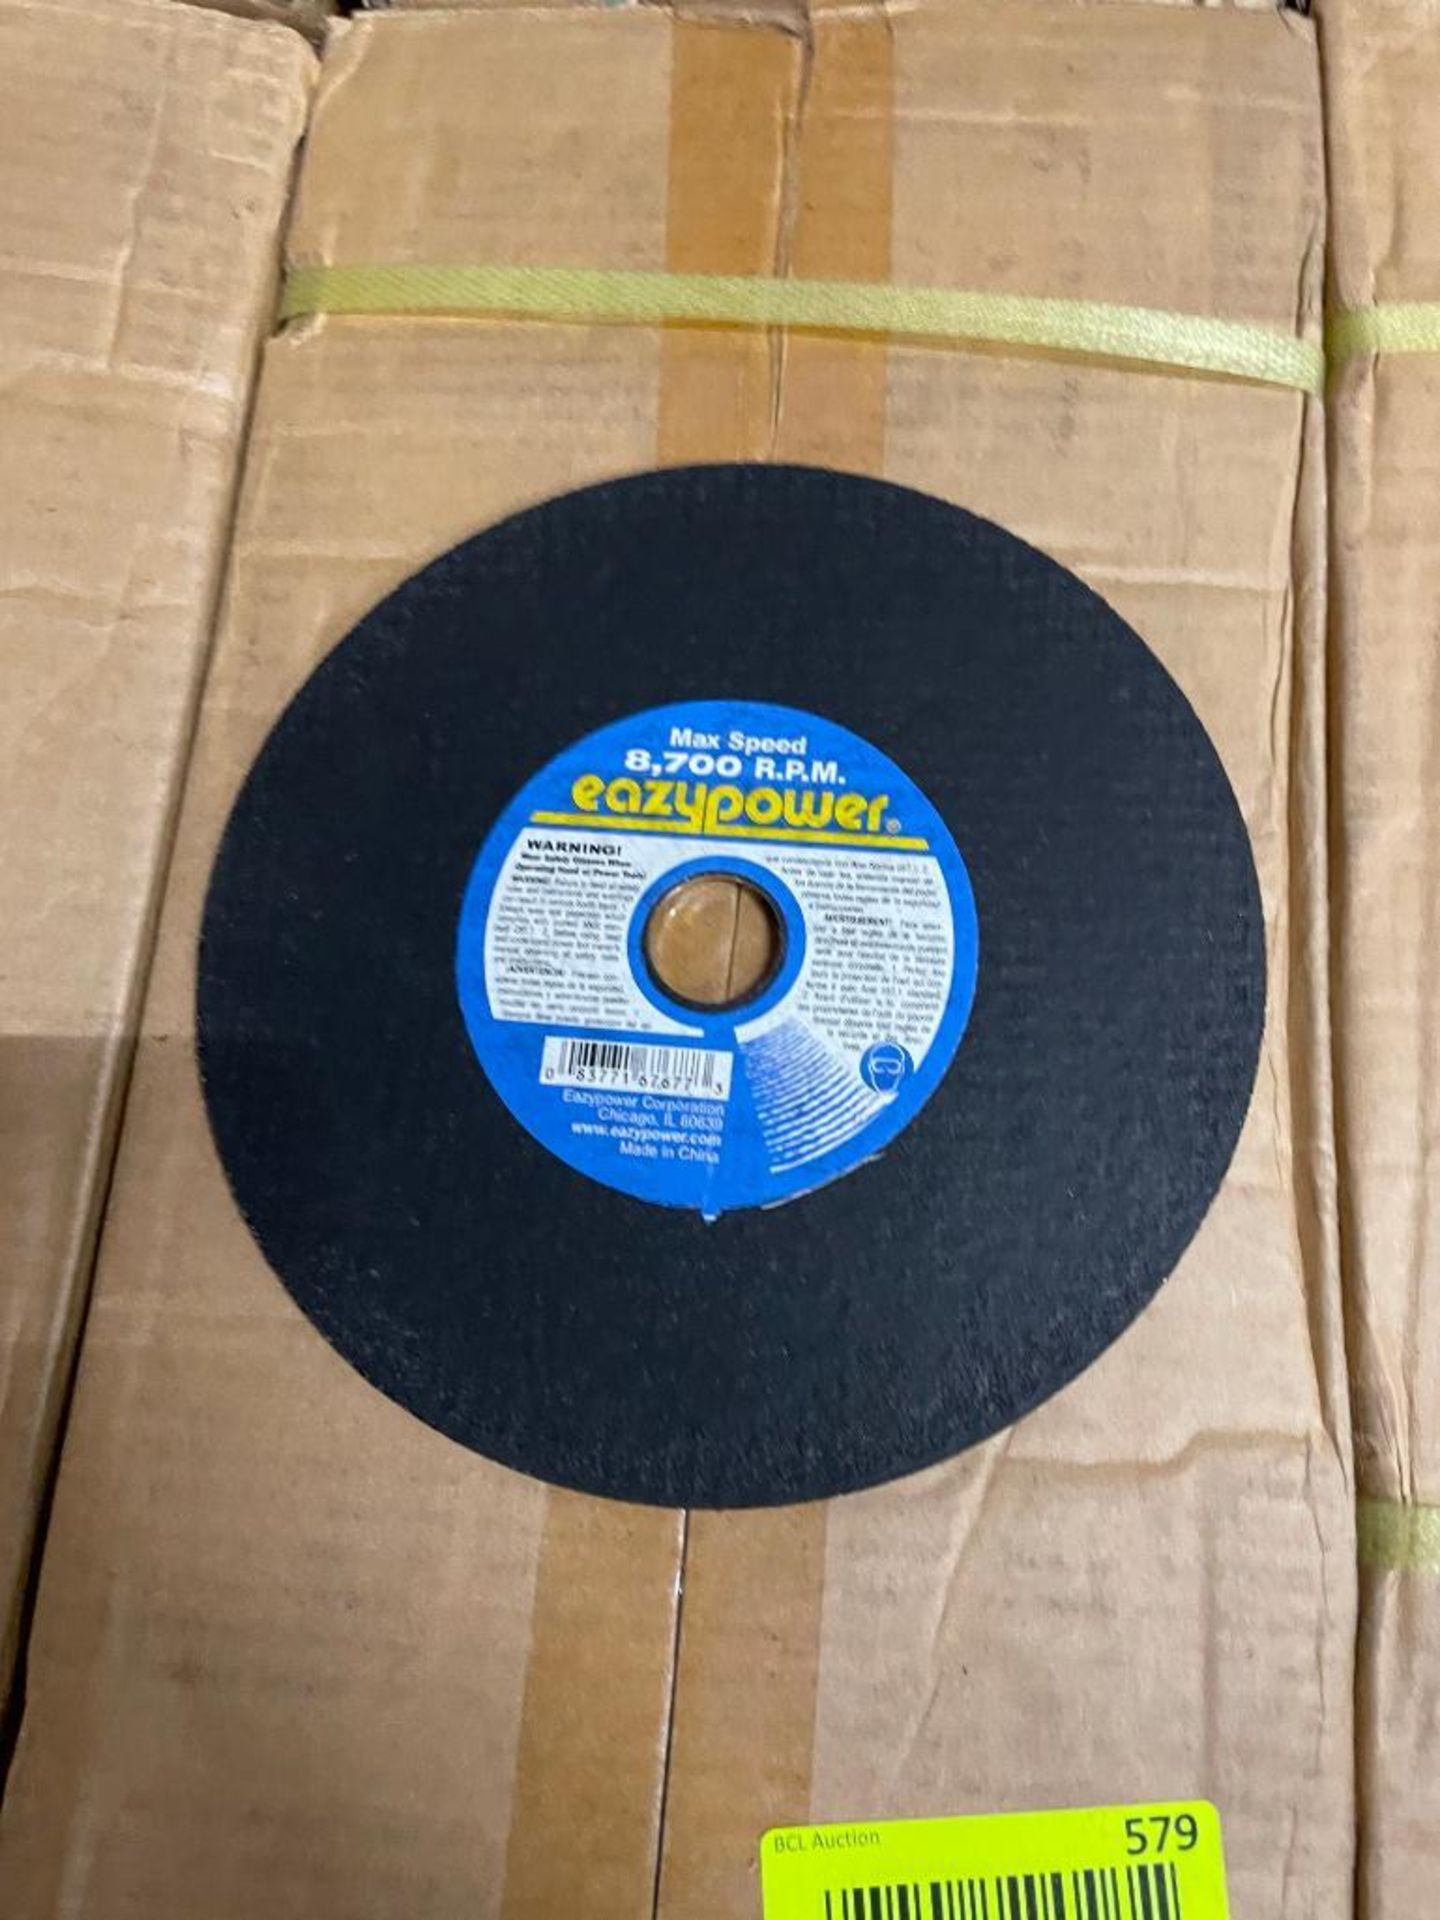 200CT OF 7" SILICON CARBIDE CUTTING ABRASIVE BLADES BRAND/MODEL EAZYPOWER 87677 ADDITIONAL INFO TOTA - Image 3 of 4